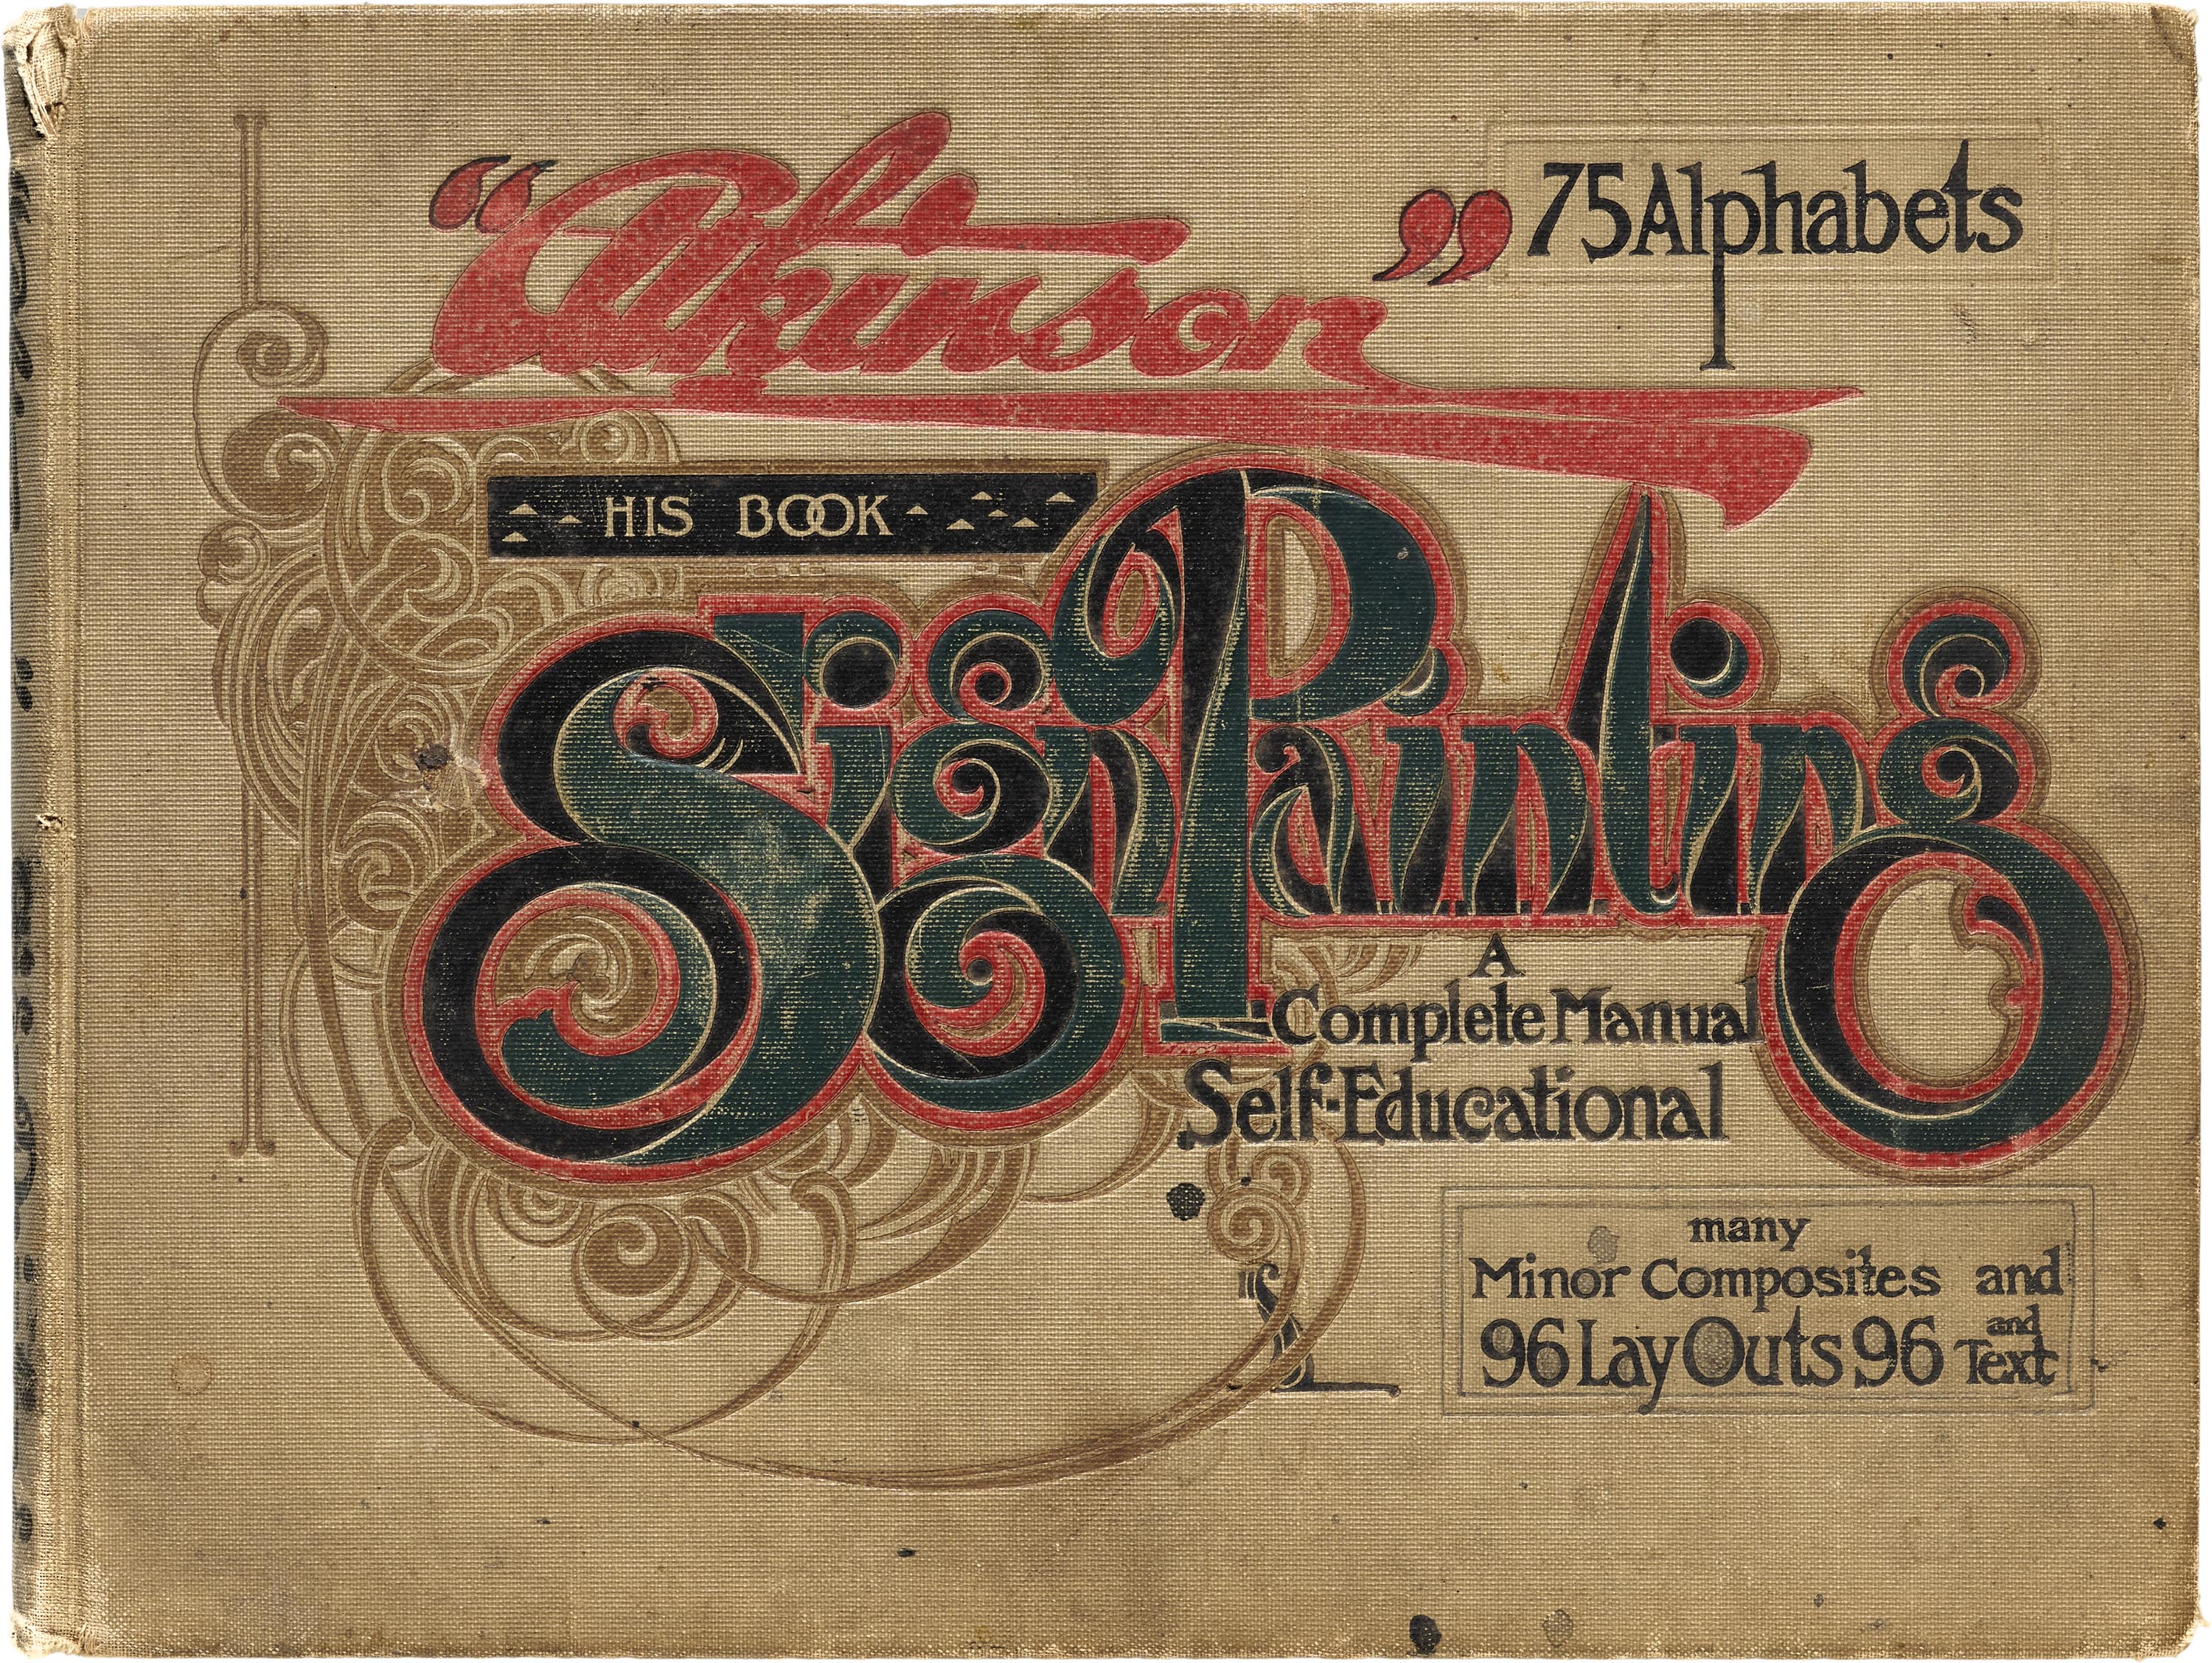 Frank H. Atkinson, Sign Painting Up to Now